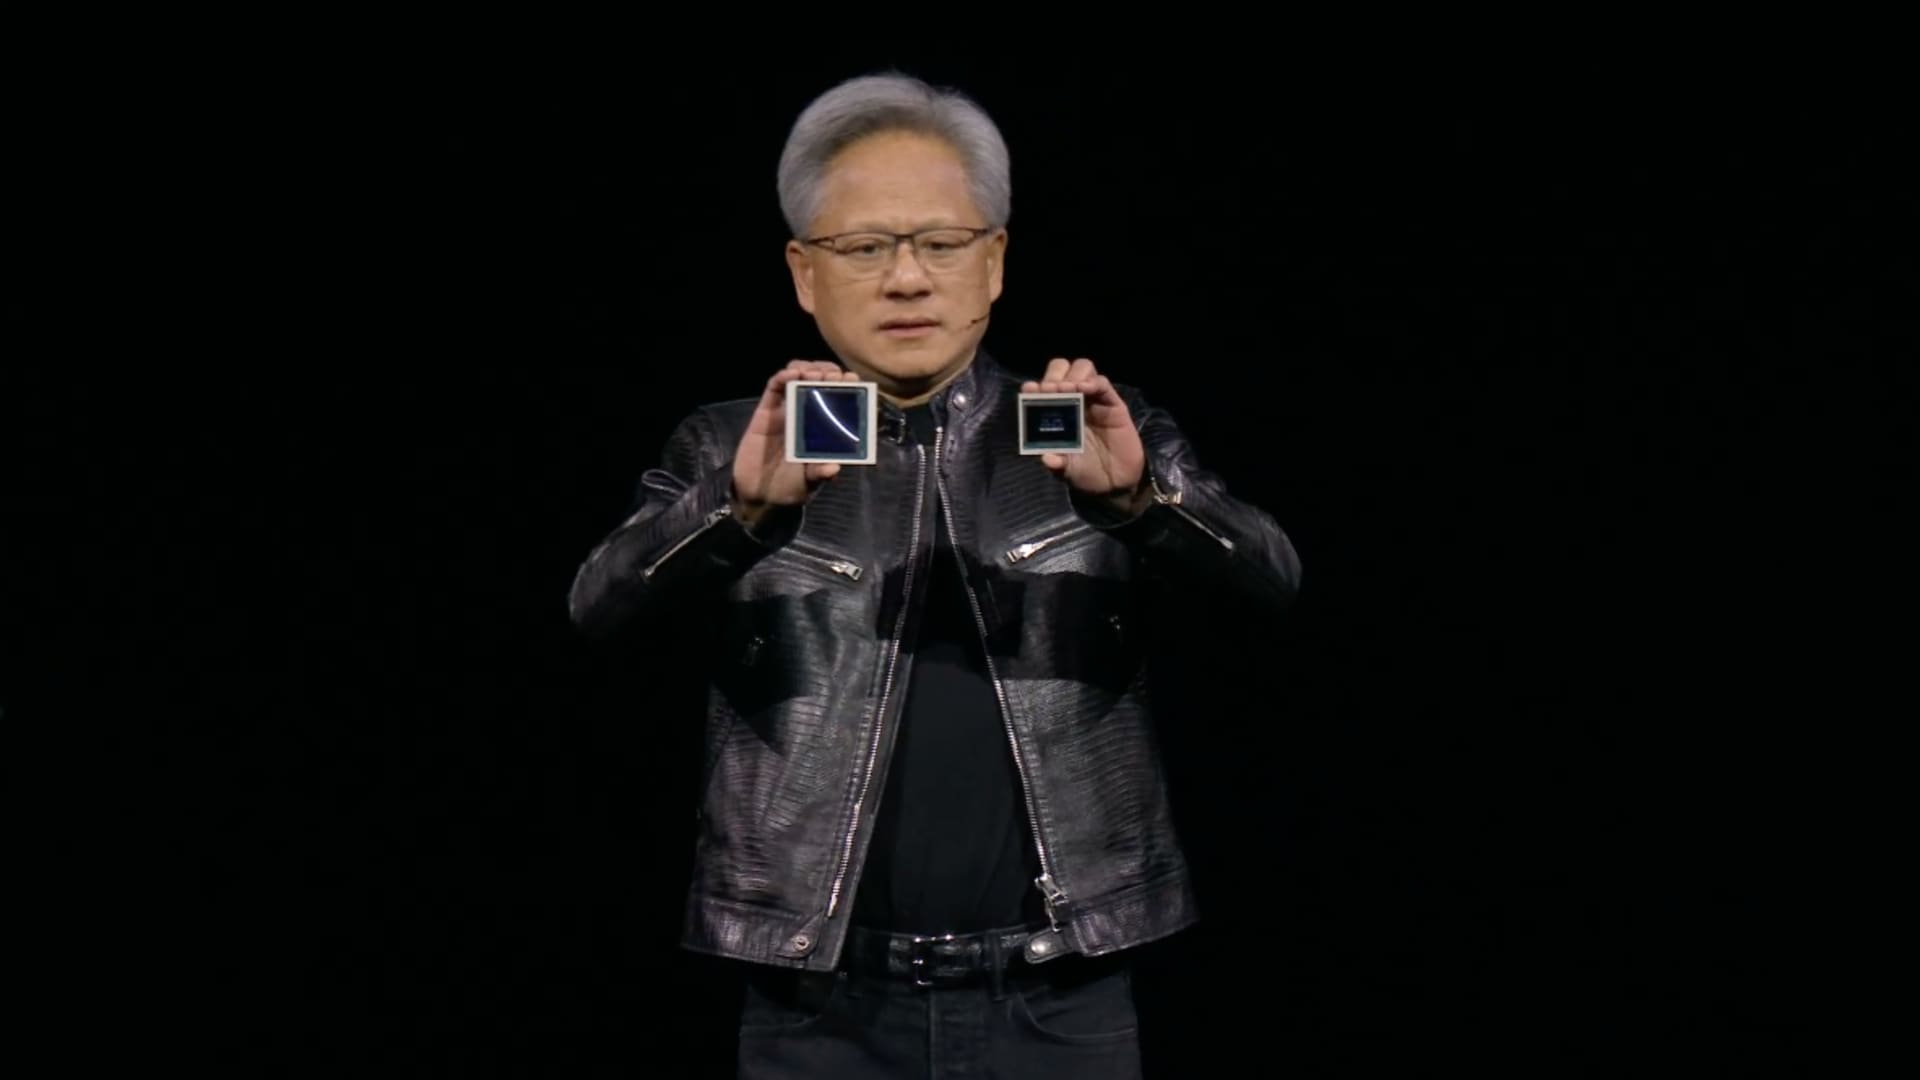 Nvidia’s latest AI chip will cost more than $30,000, CEO says